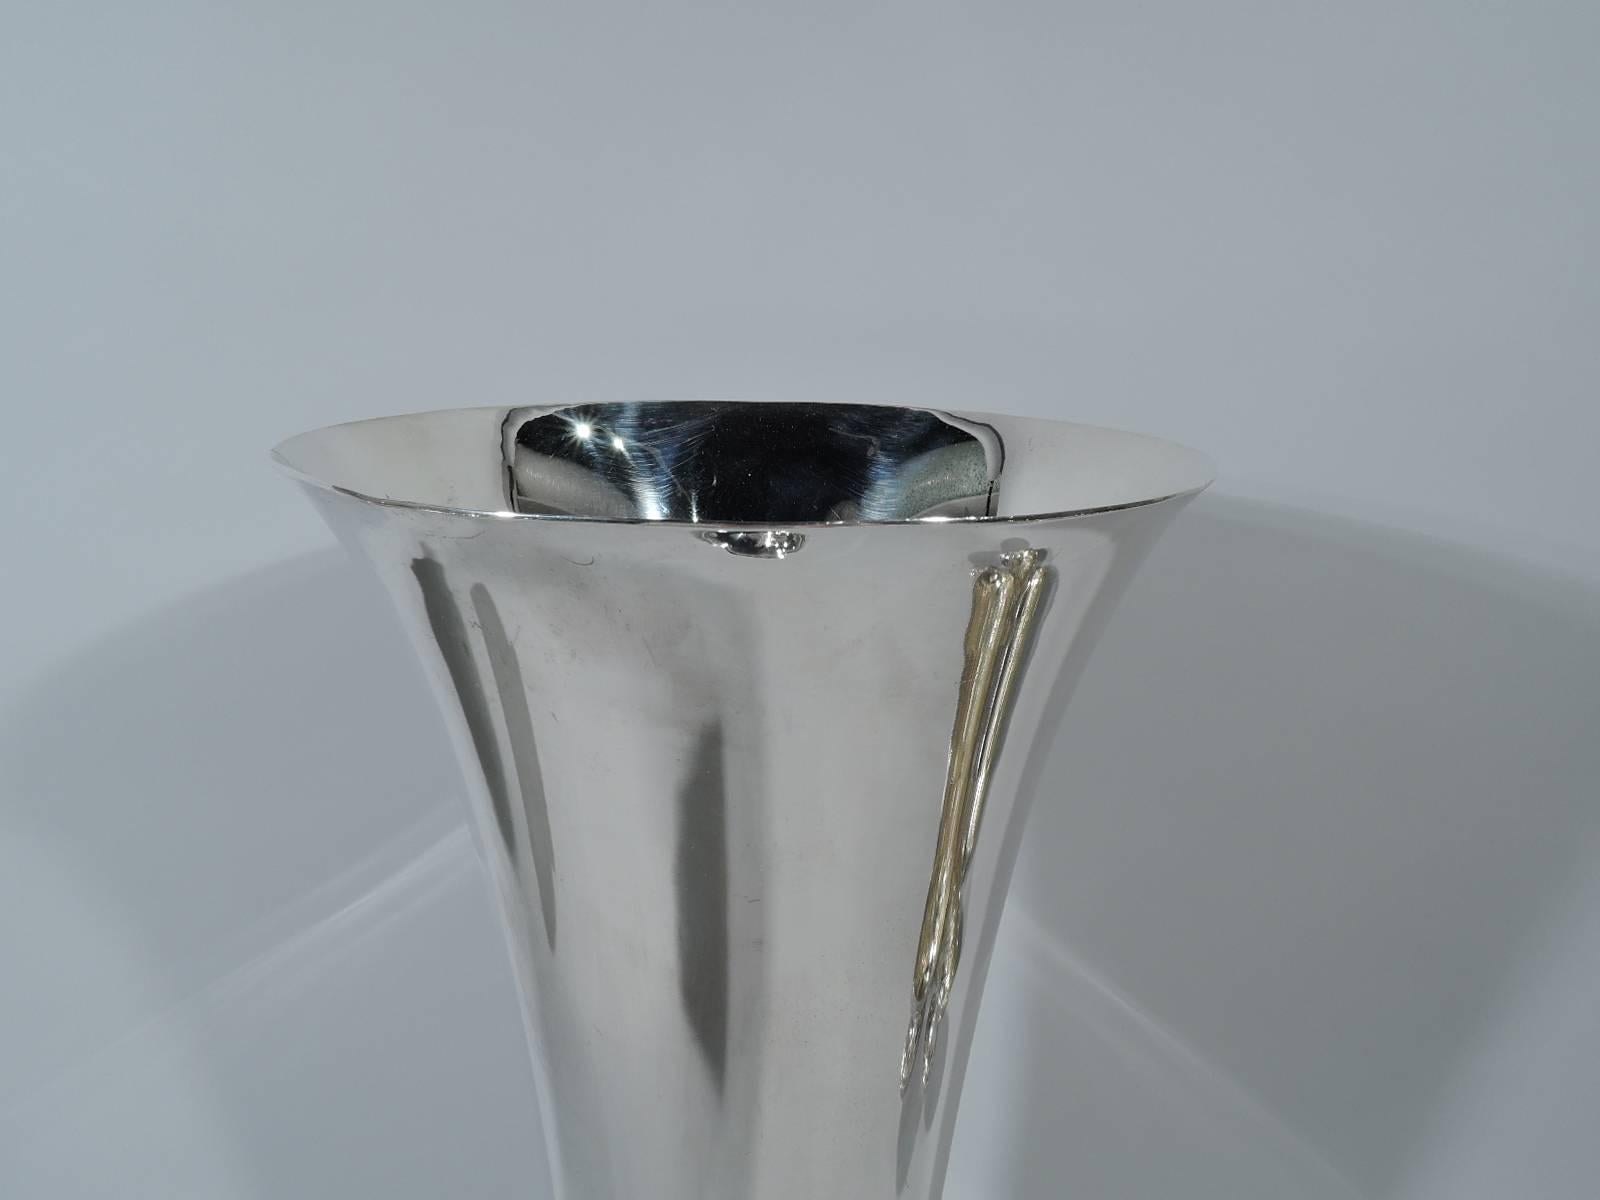 Large sterling silver trumpet vase. Made by Tiffany & Co. in New York. Full-bodied and substantial with flared rim, knop, and stepped foot. Girdled at bottom. Hallmark includes pattern no. 20689 (first produced in 1926) and director’s letter m